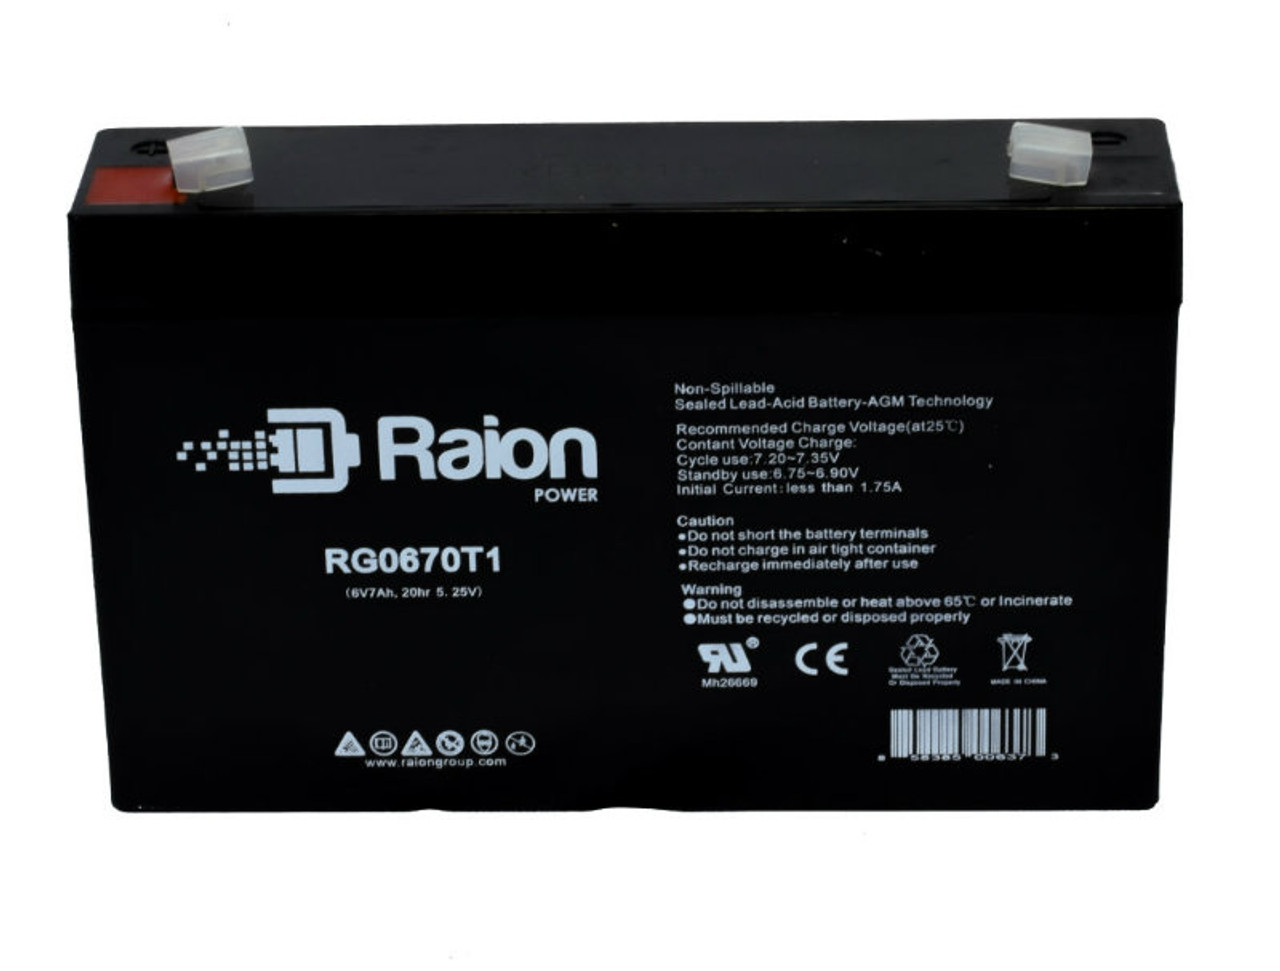 Raion Power RG0670T1 Replacement Battery Cartridge for Kid Motorz 0726 Quad Racer Pink